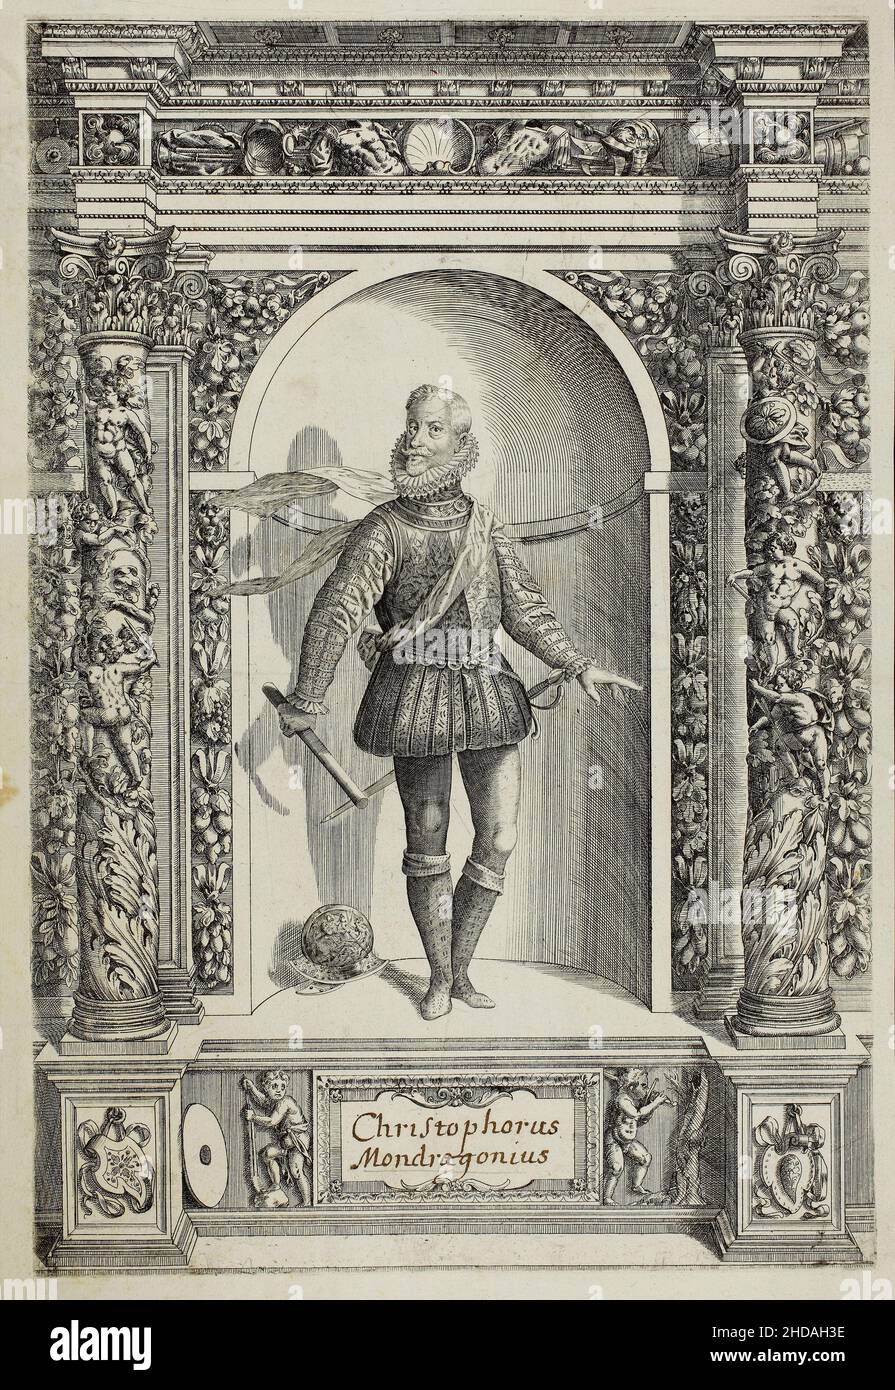 Engraving portrait of Christophorus Mondragonius. 1601 This engraving from the book of the arms collection Archduke Ferdinand, it was first published Stock Photo